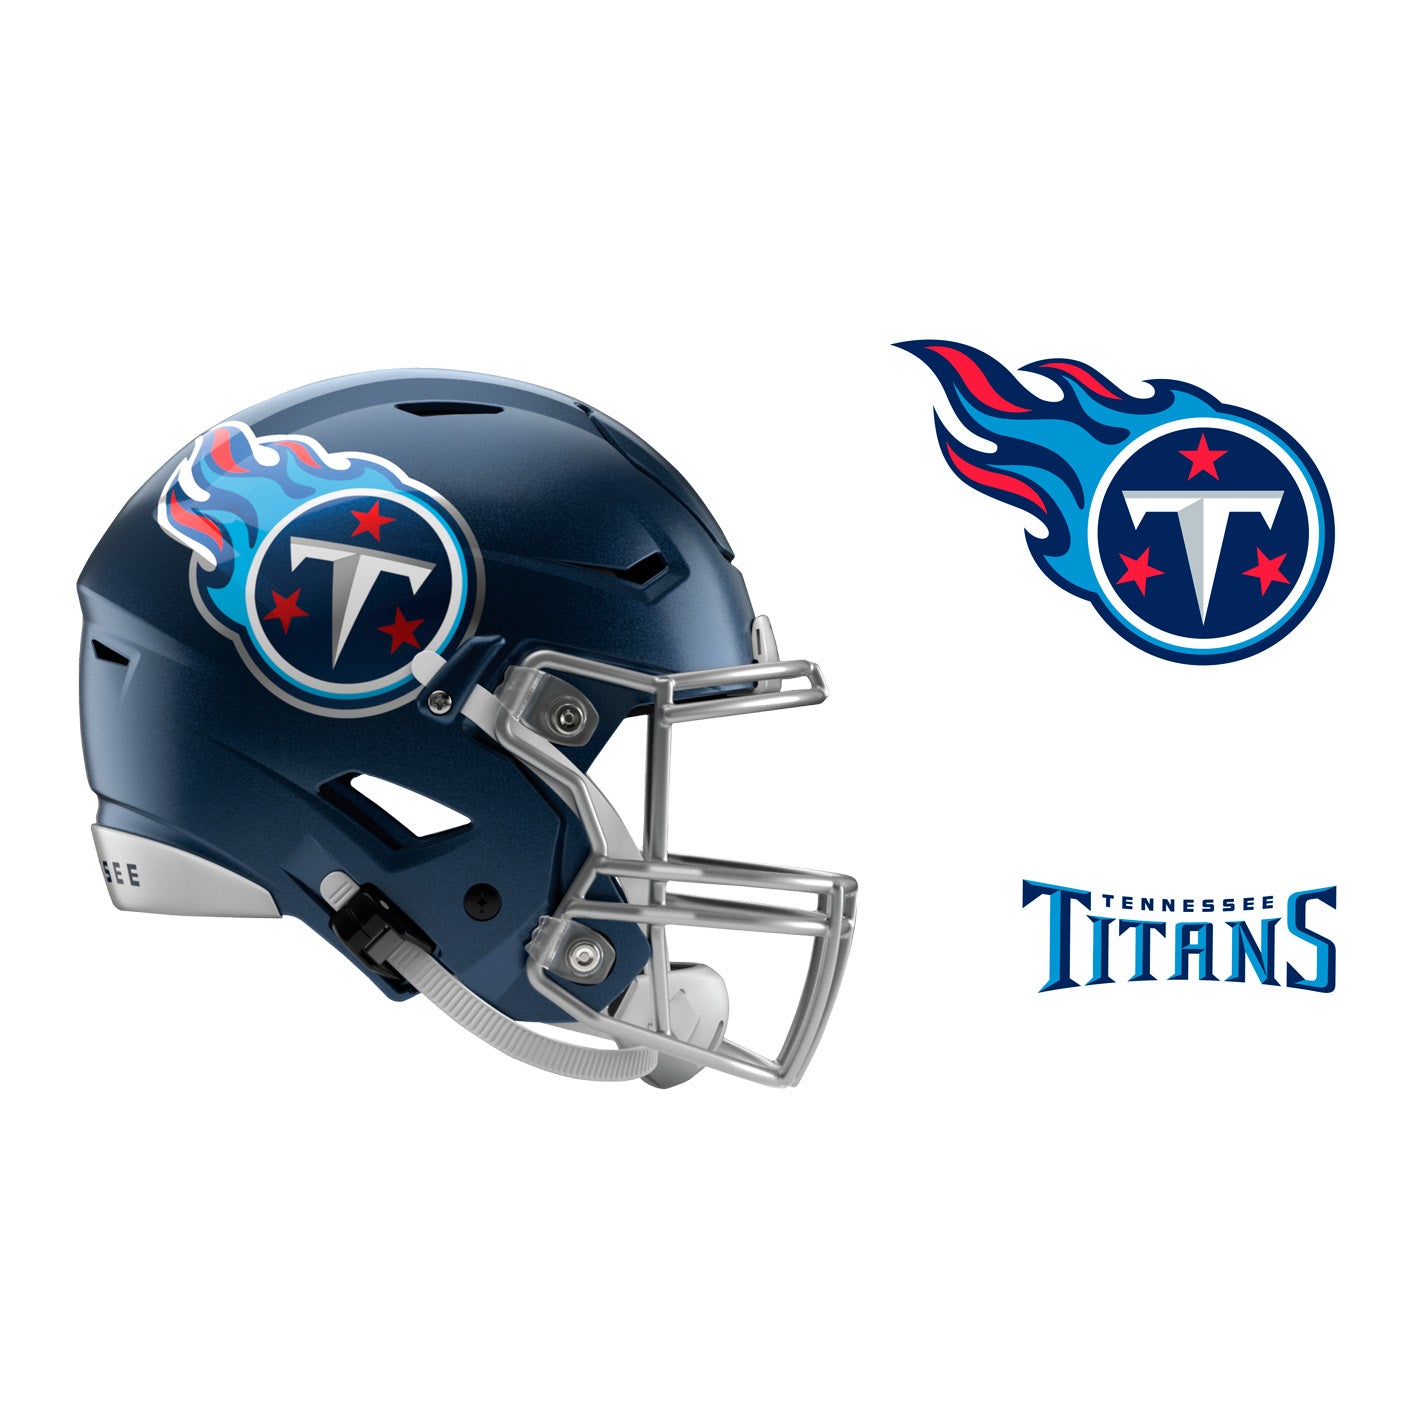 Pack of 6 FATHEAD 89-00983 Tennessee Titans Helmet Wall Graphic Measures 12 X 15.5 in 